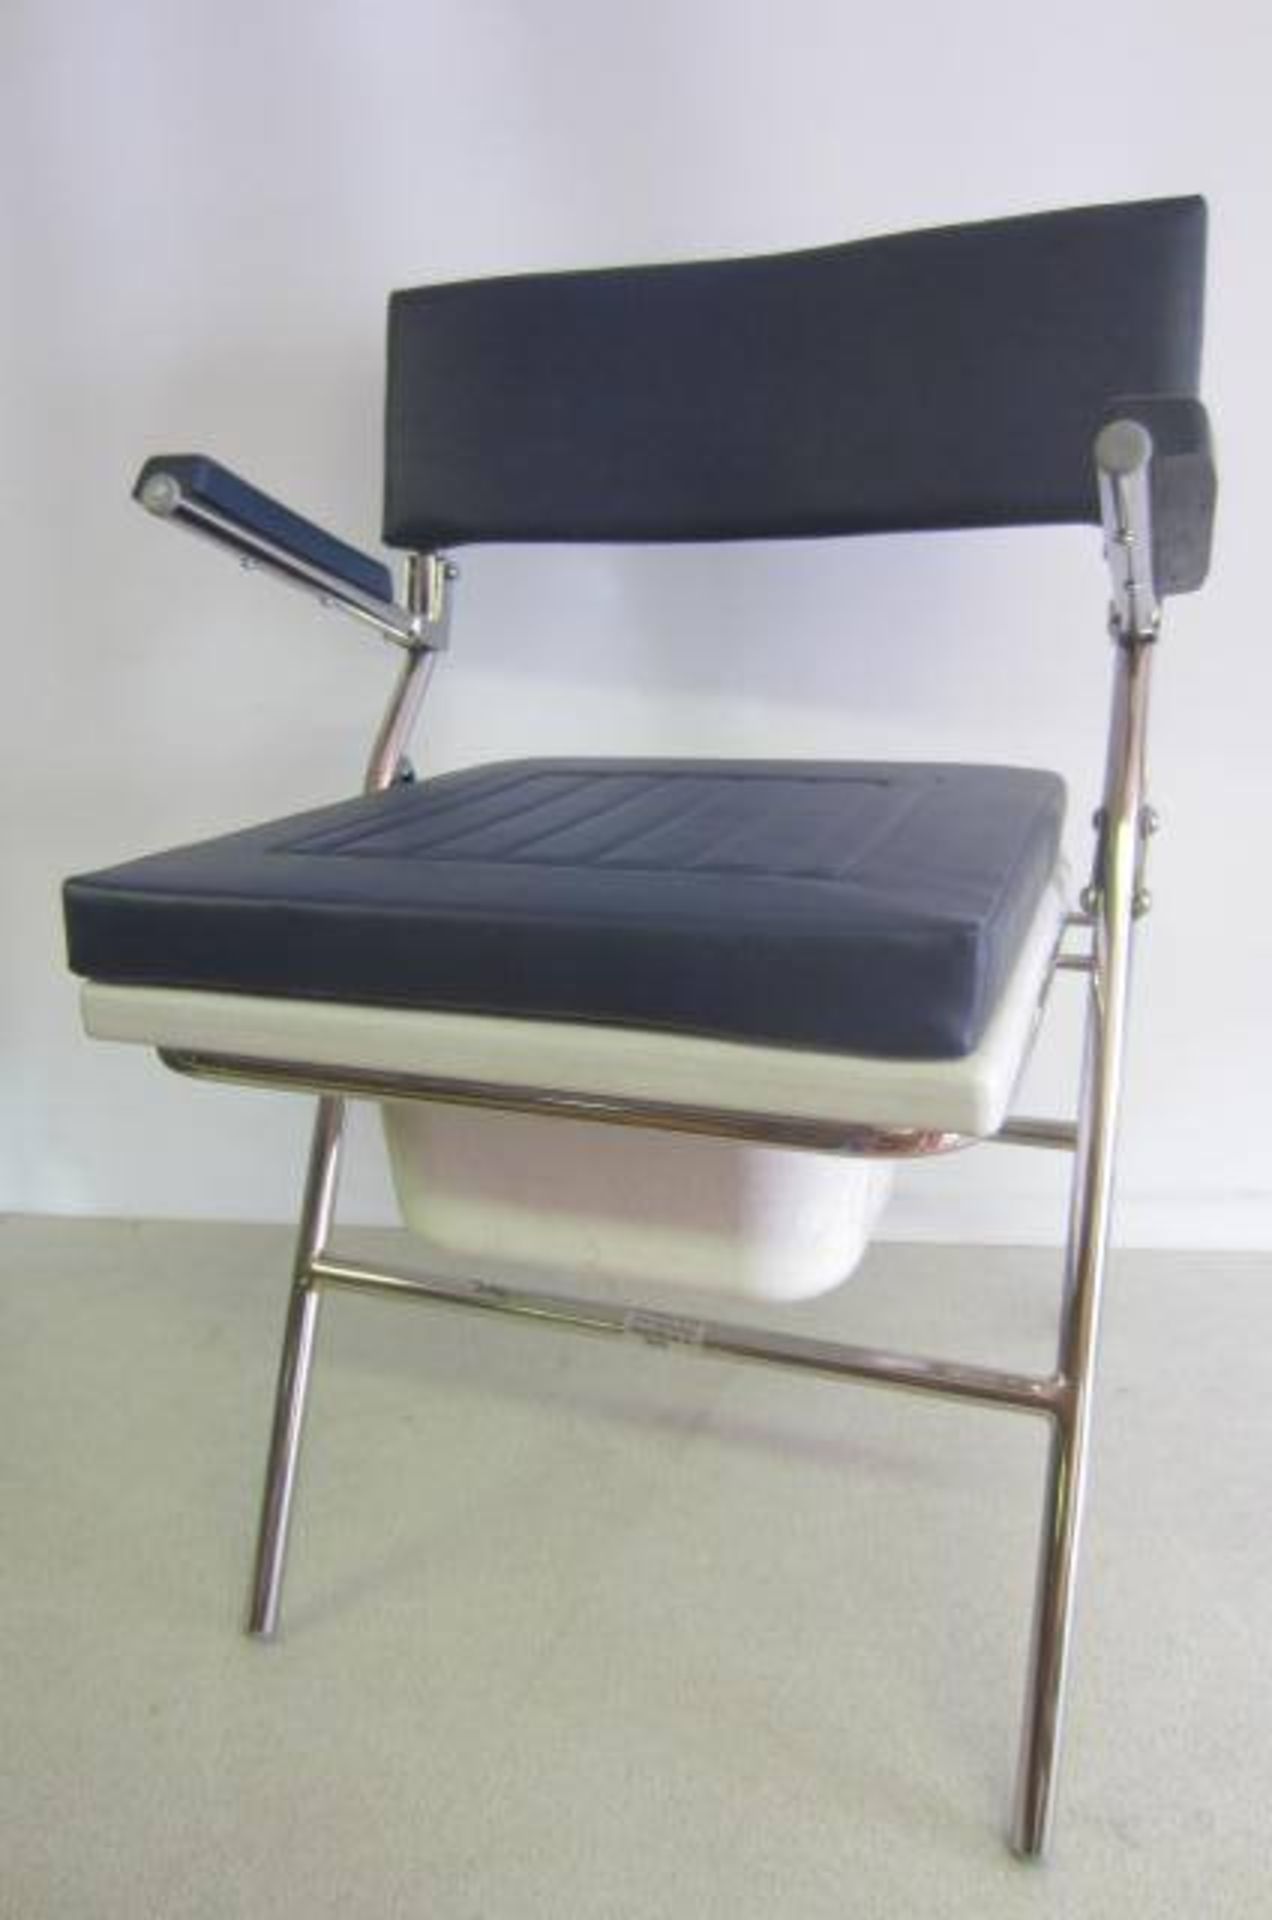 Days Patterson Medical Commode Chair, Model 121AC. In Box as New.